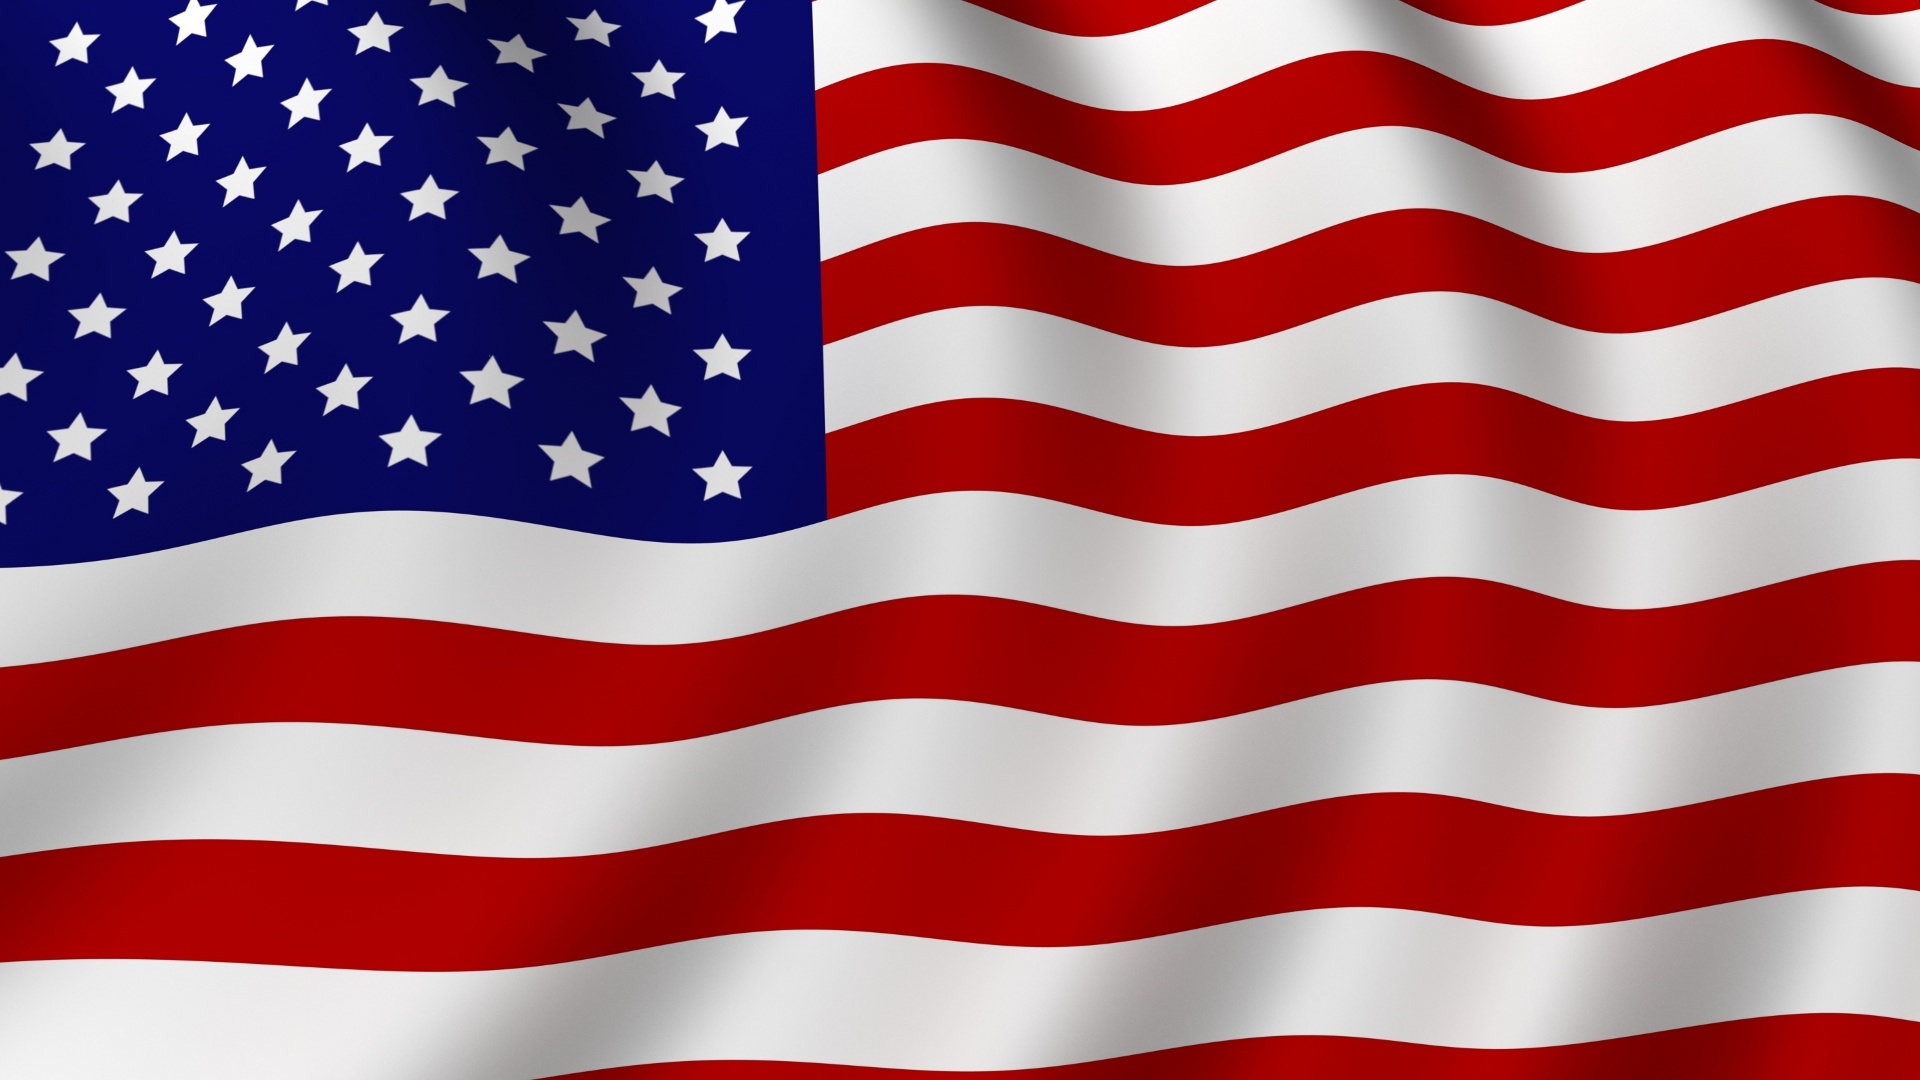 flag background wallpapers wallpaper 1920x1080 1920x1080